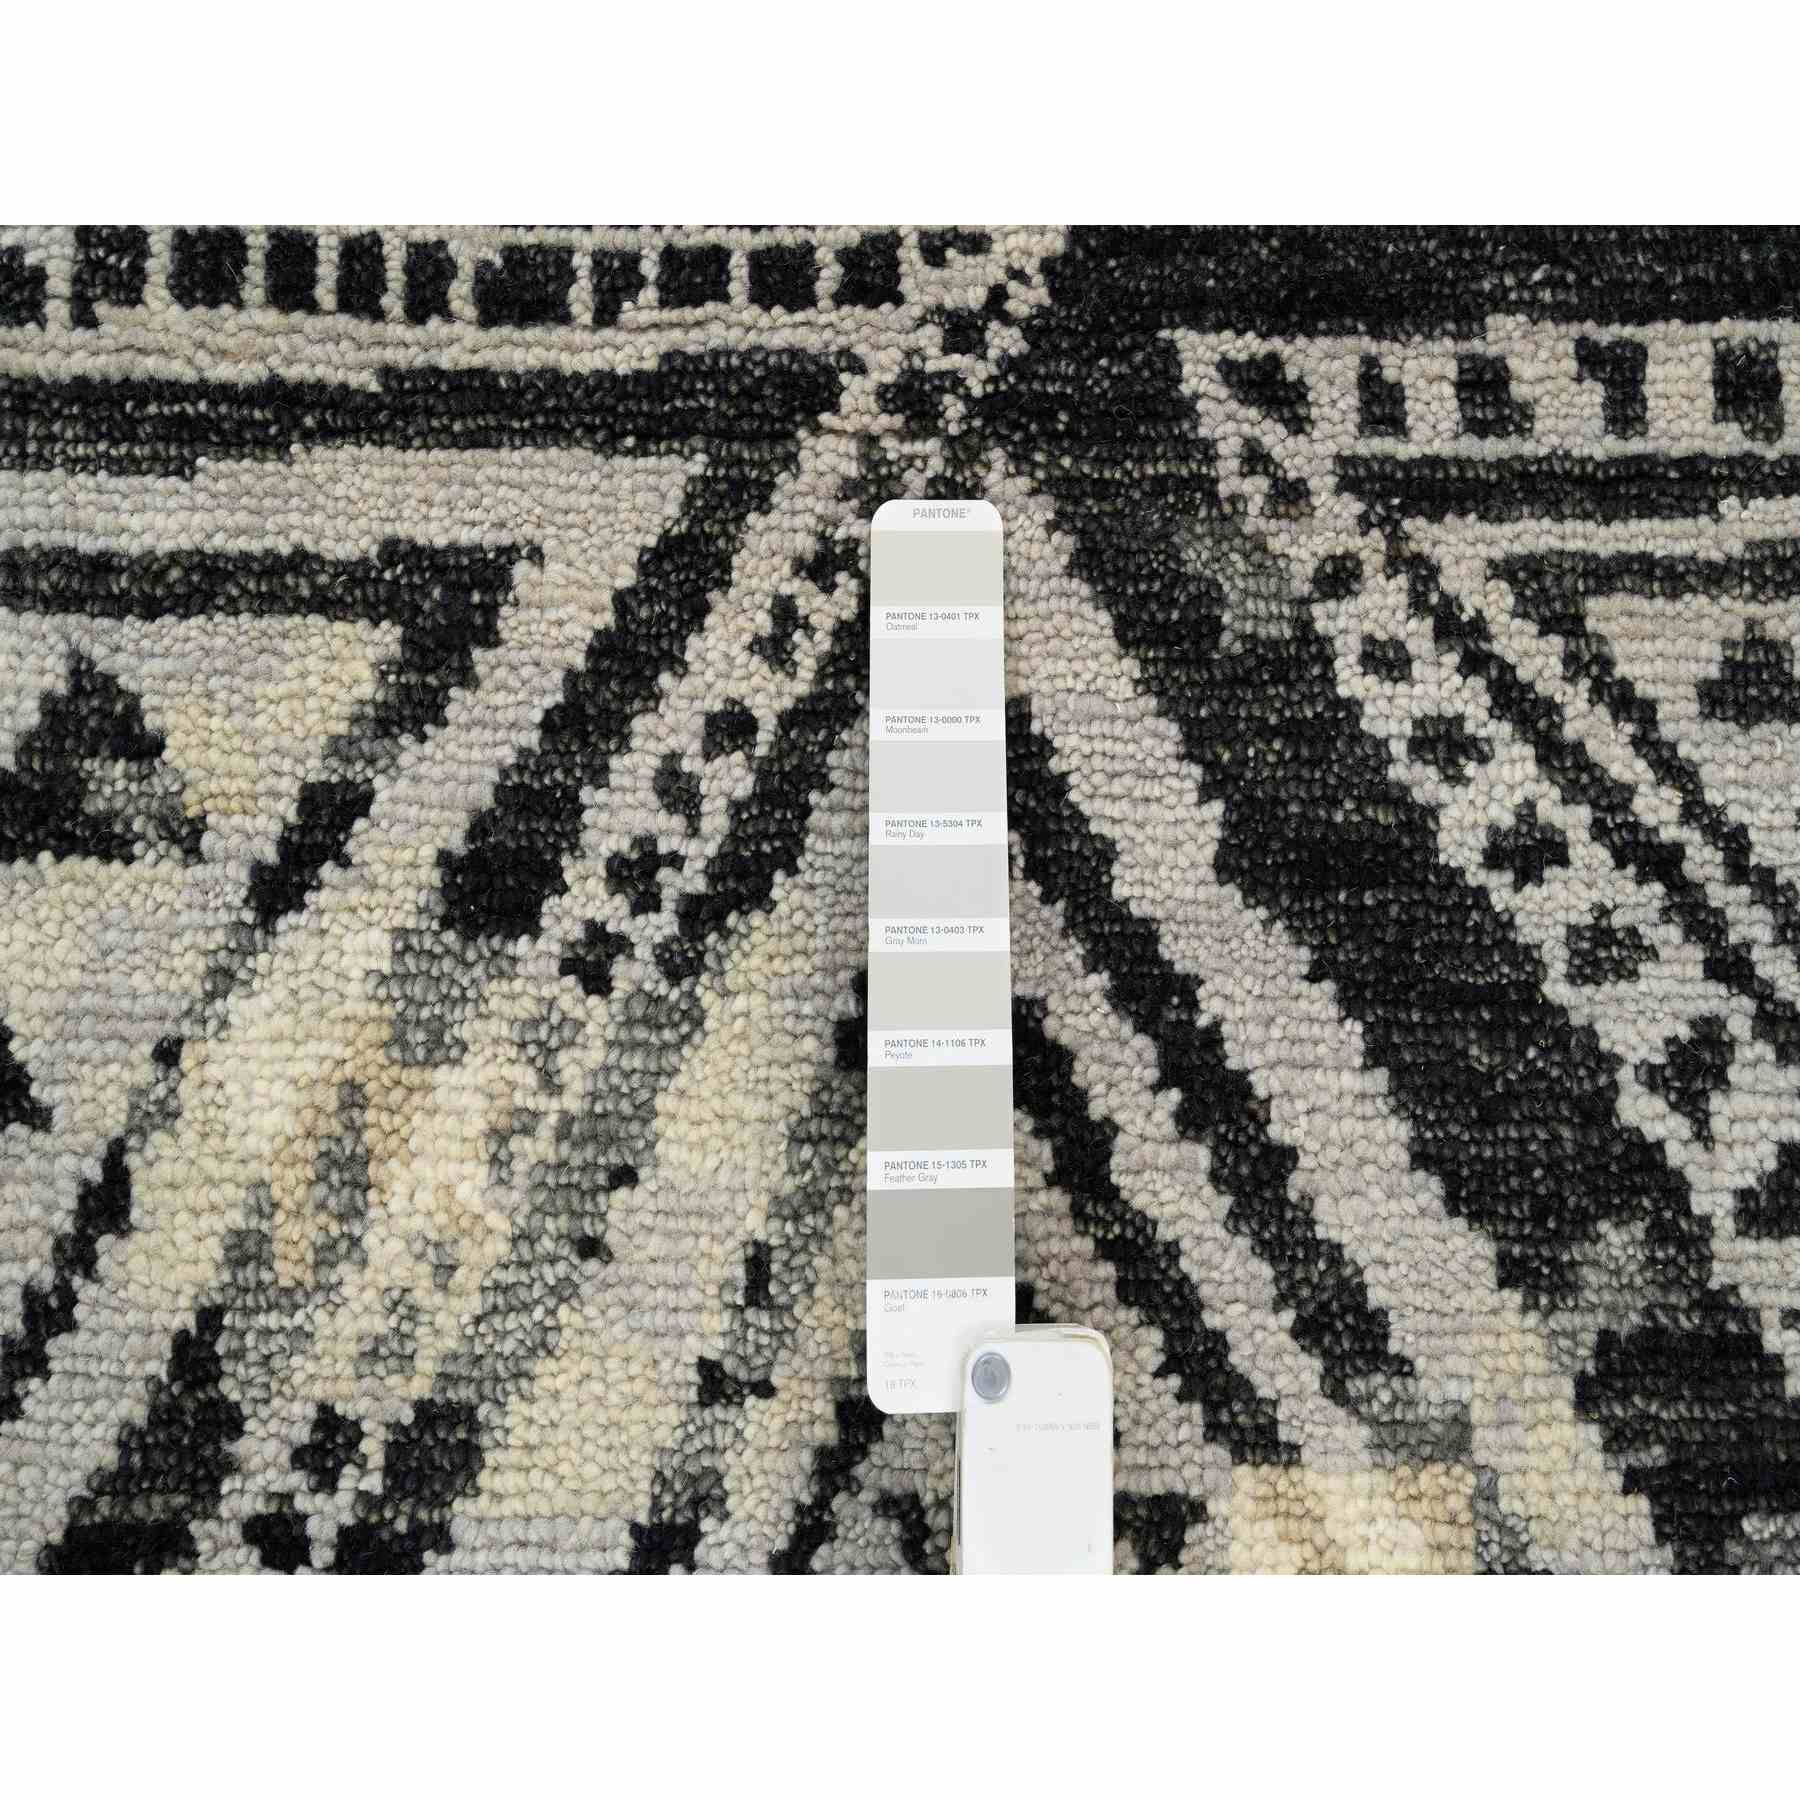 Modern-and-Contemporary-Hand-Knotted-Rug-319605